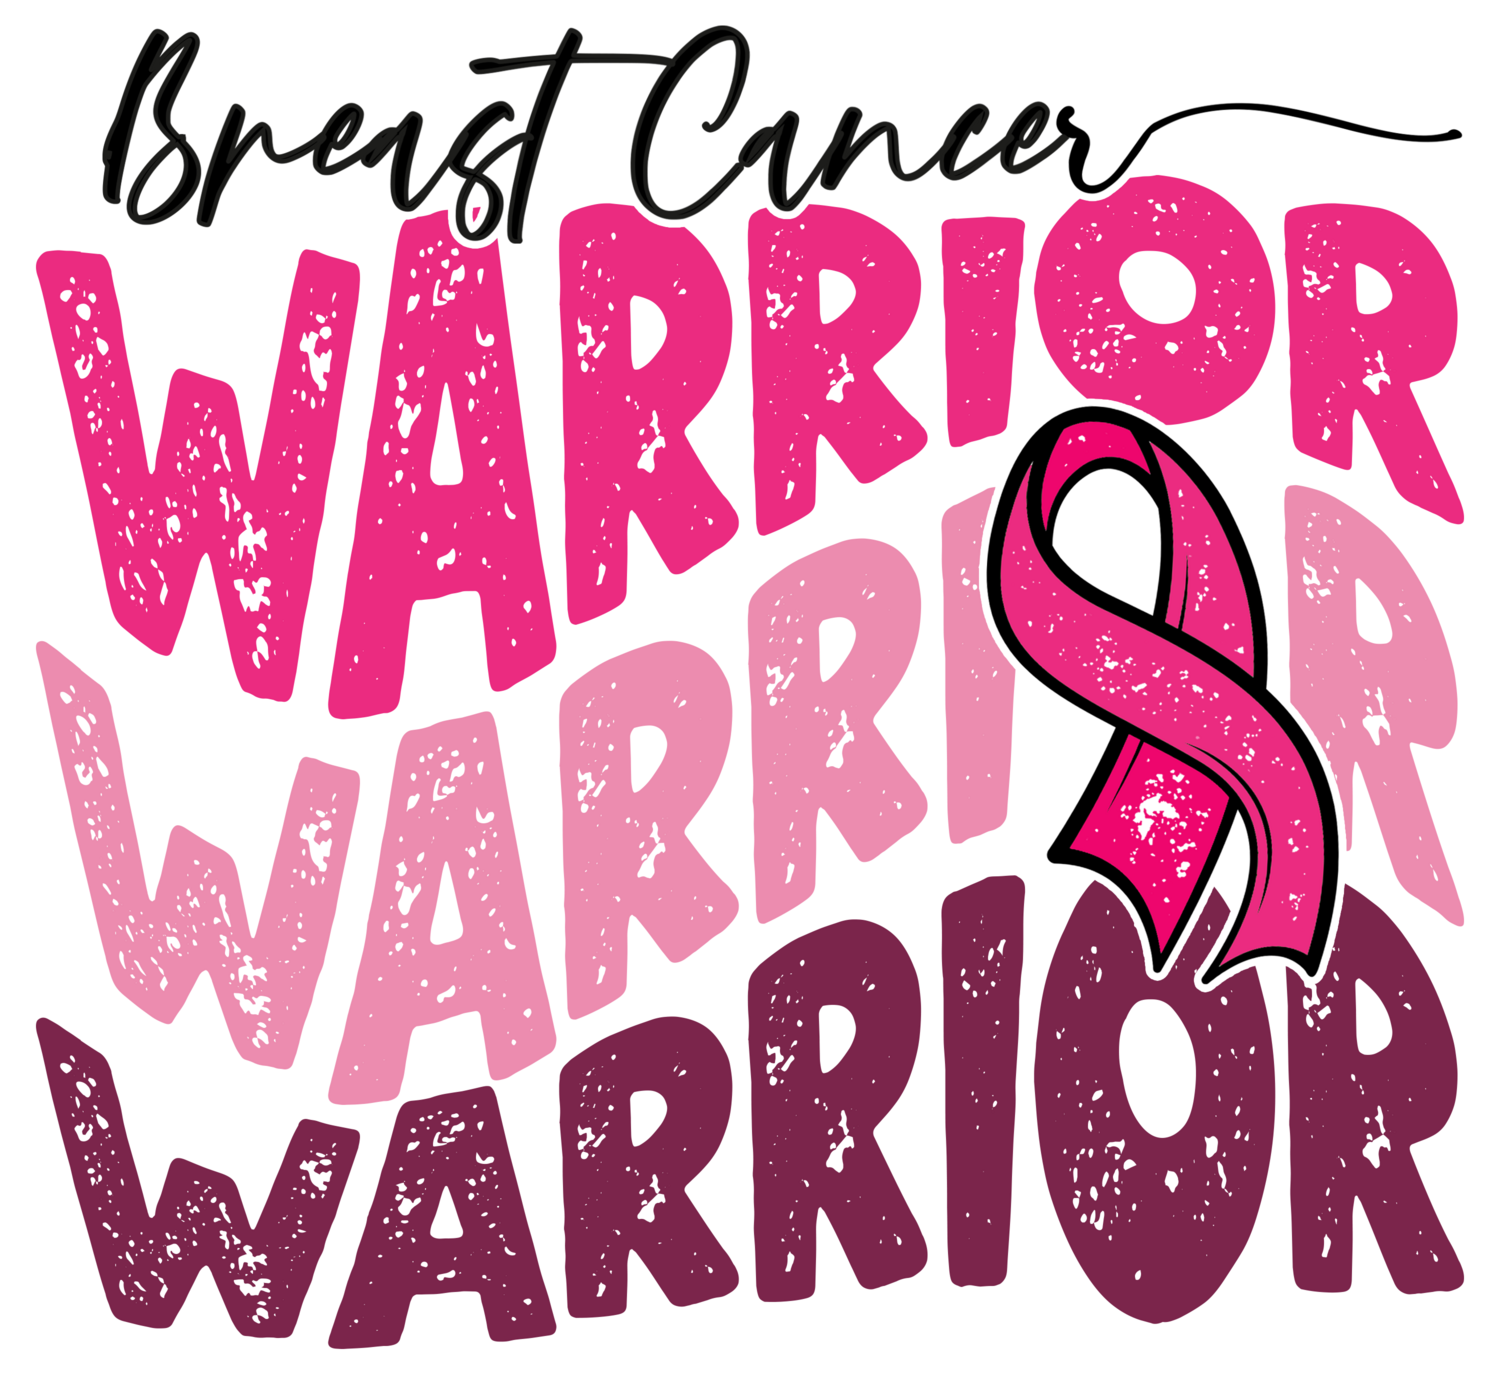 Ready To Press Breast Cancer 22 Warrior